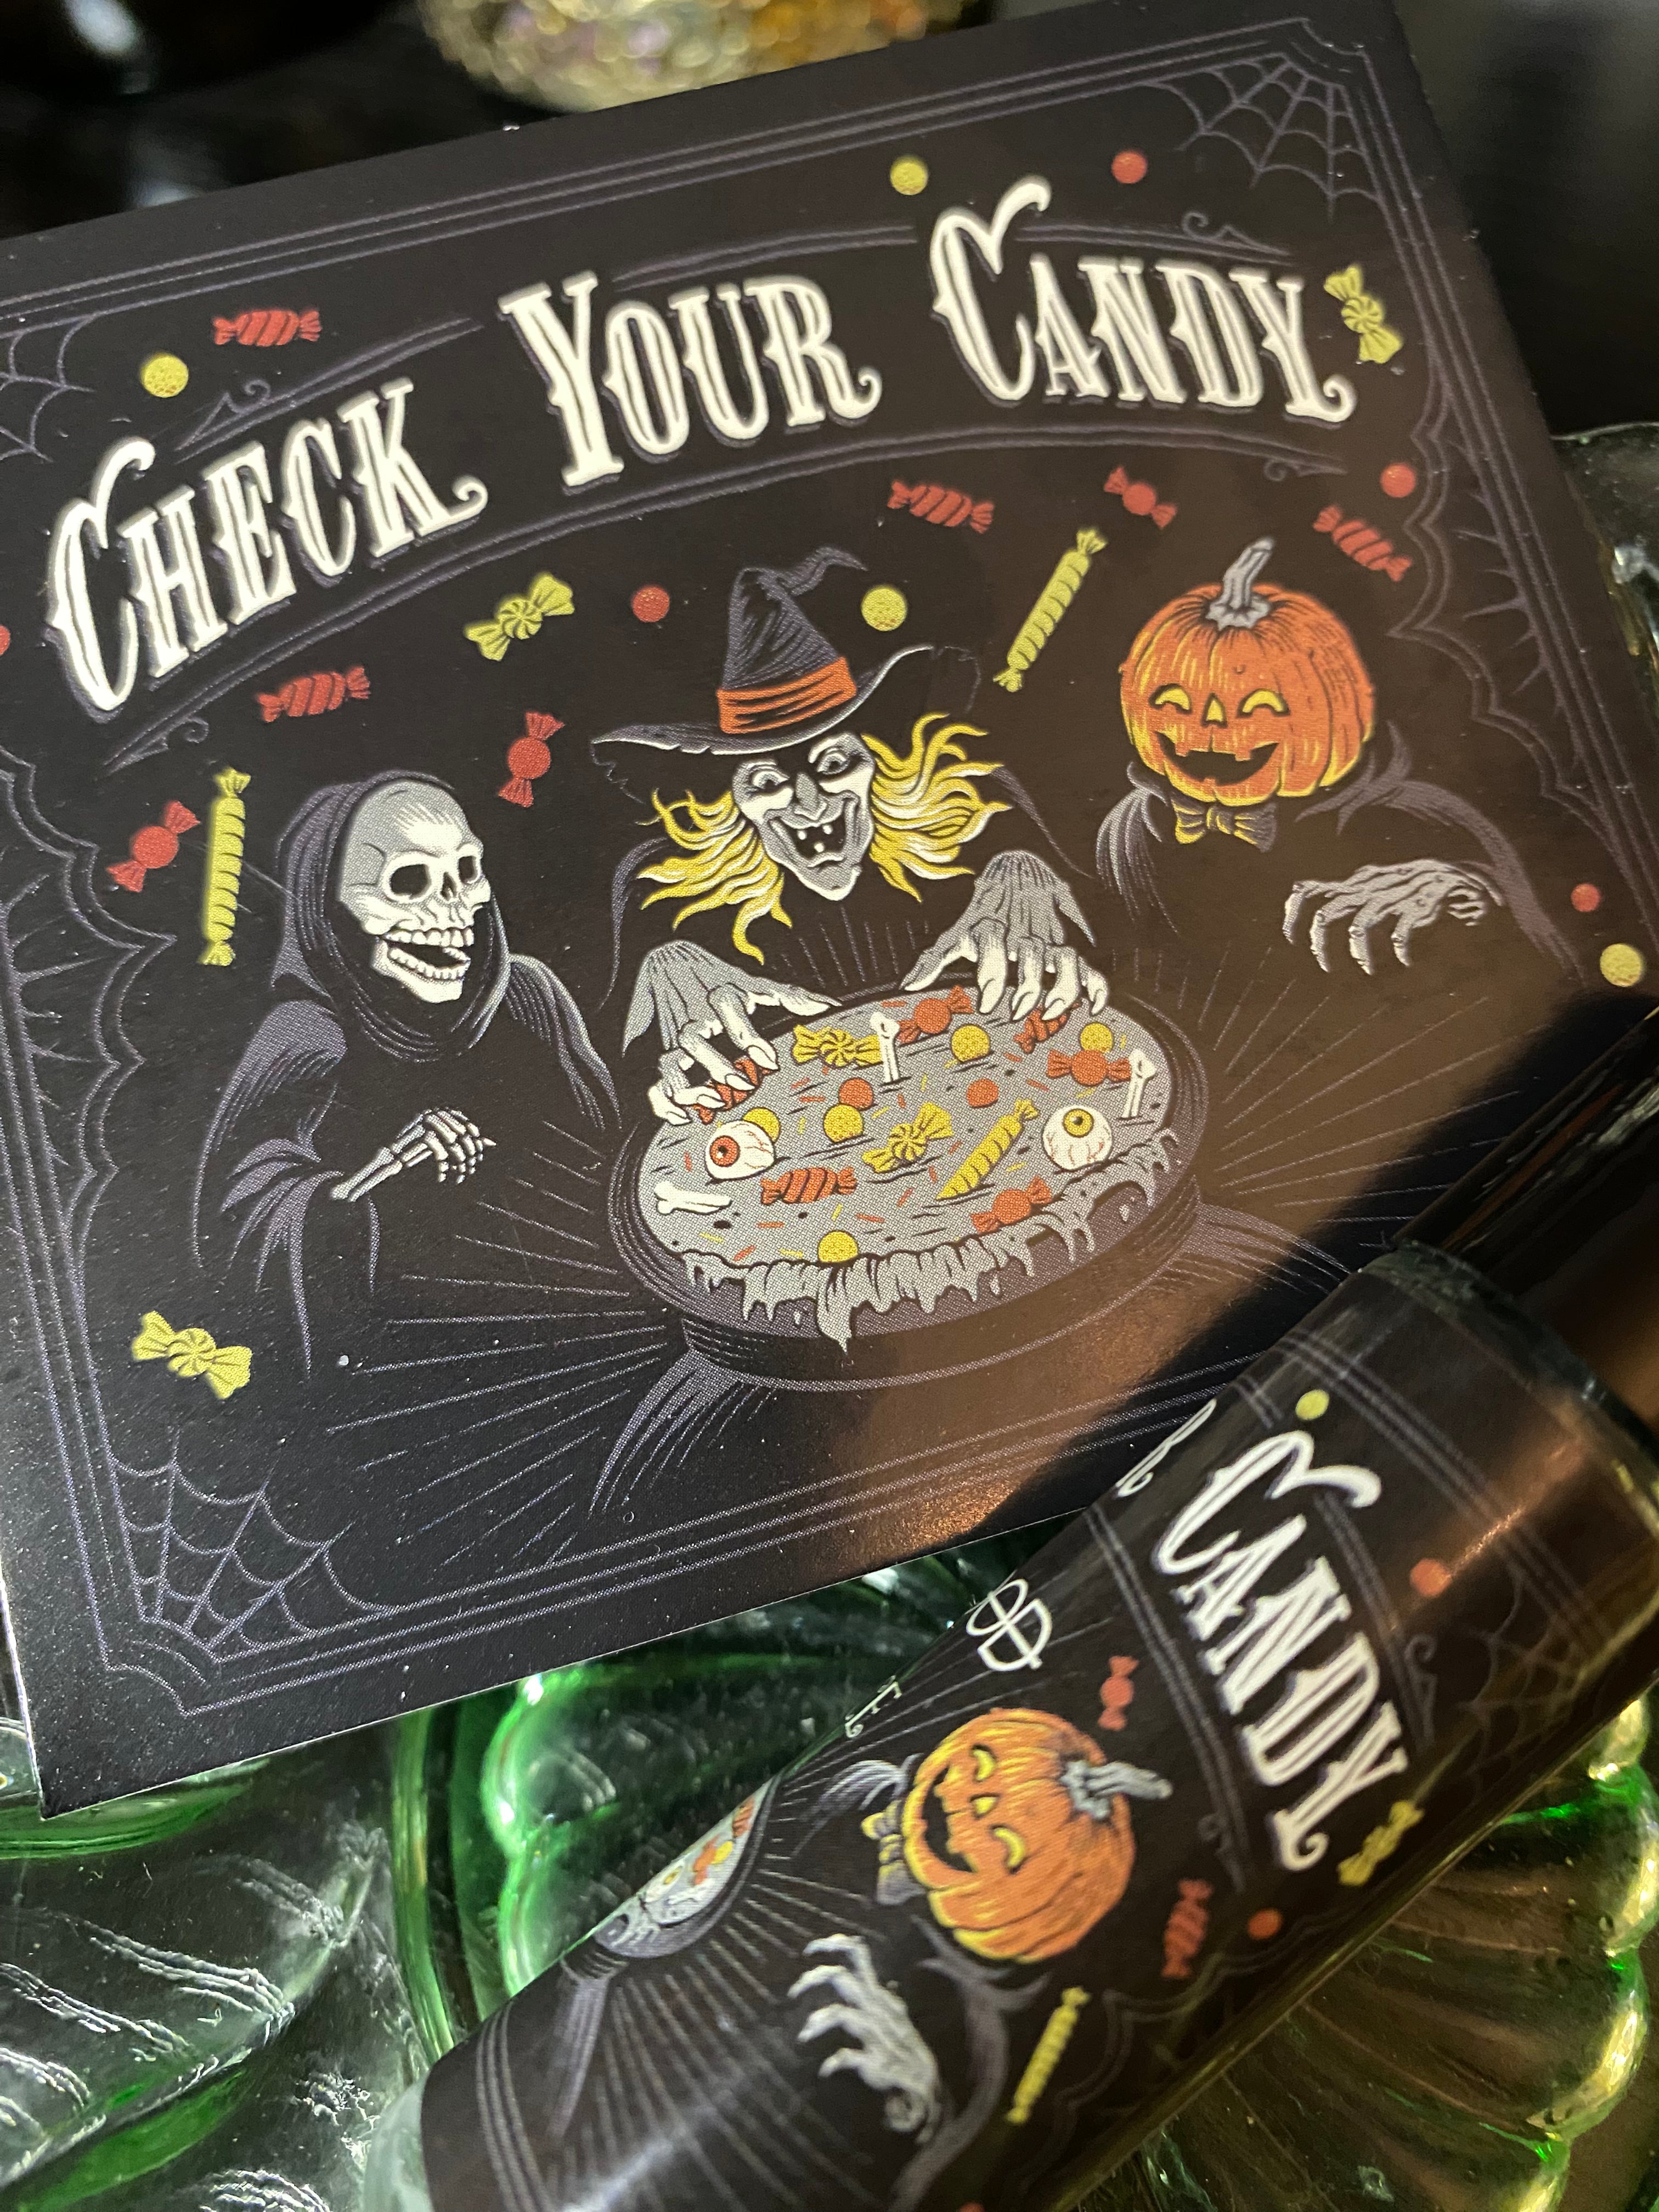 FOXBLOOD X SEANCE - Check your Candy PLEASE READ